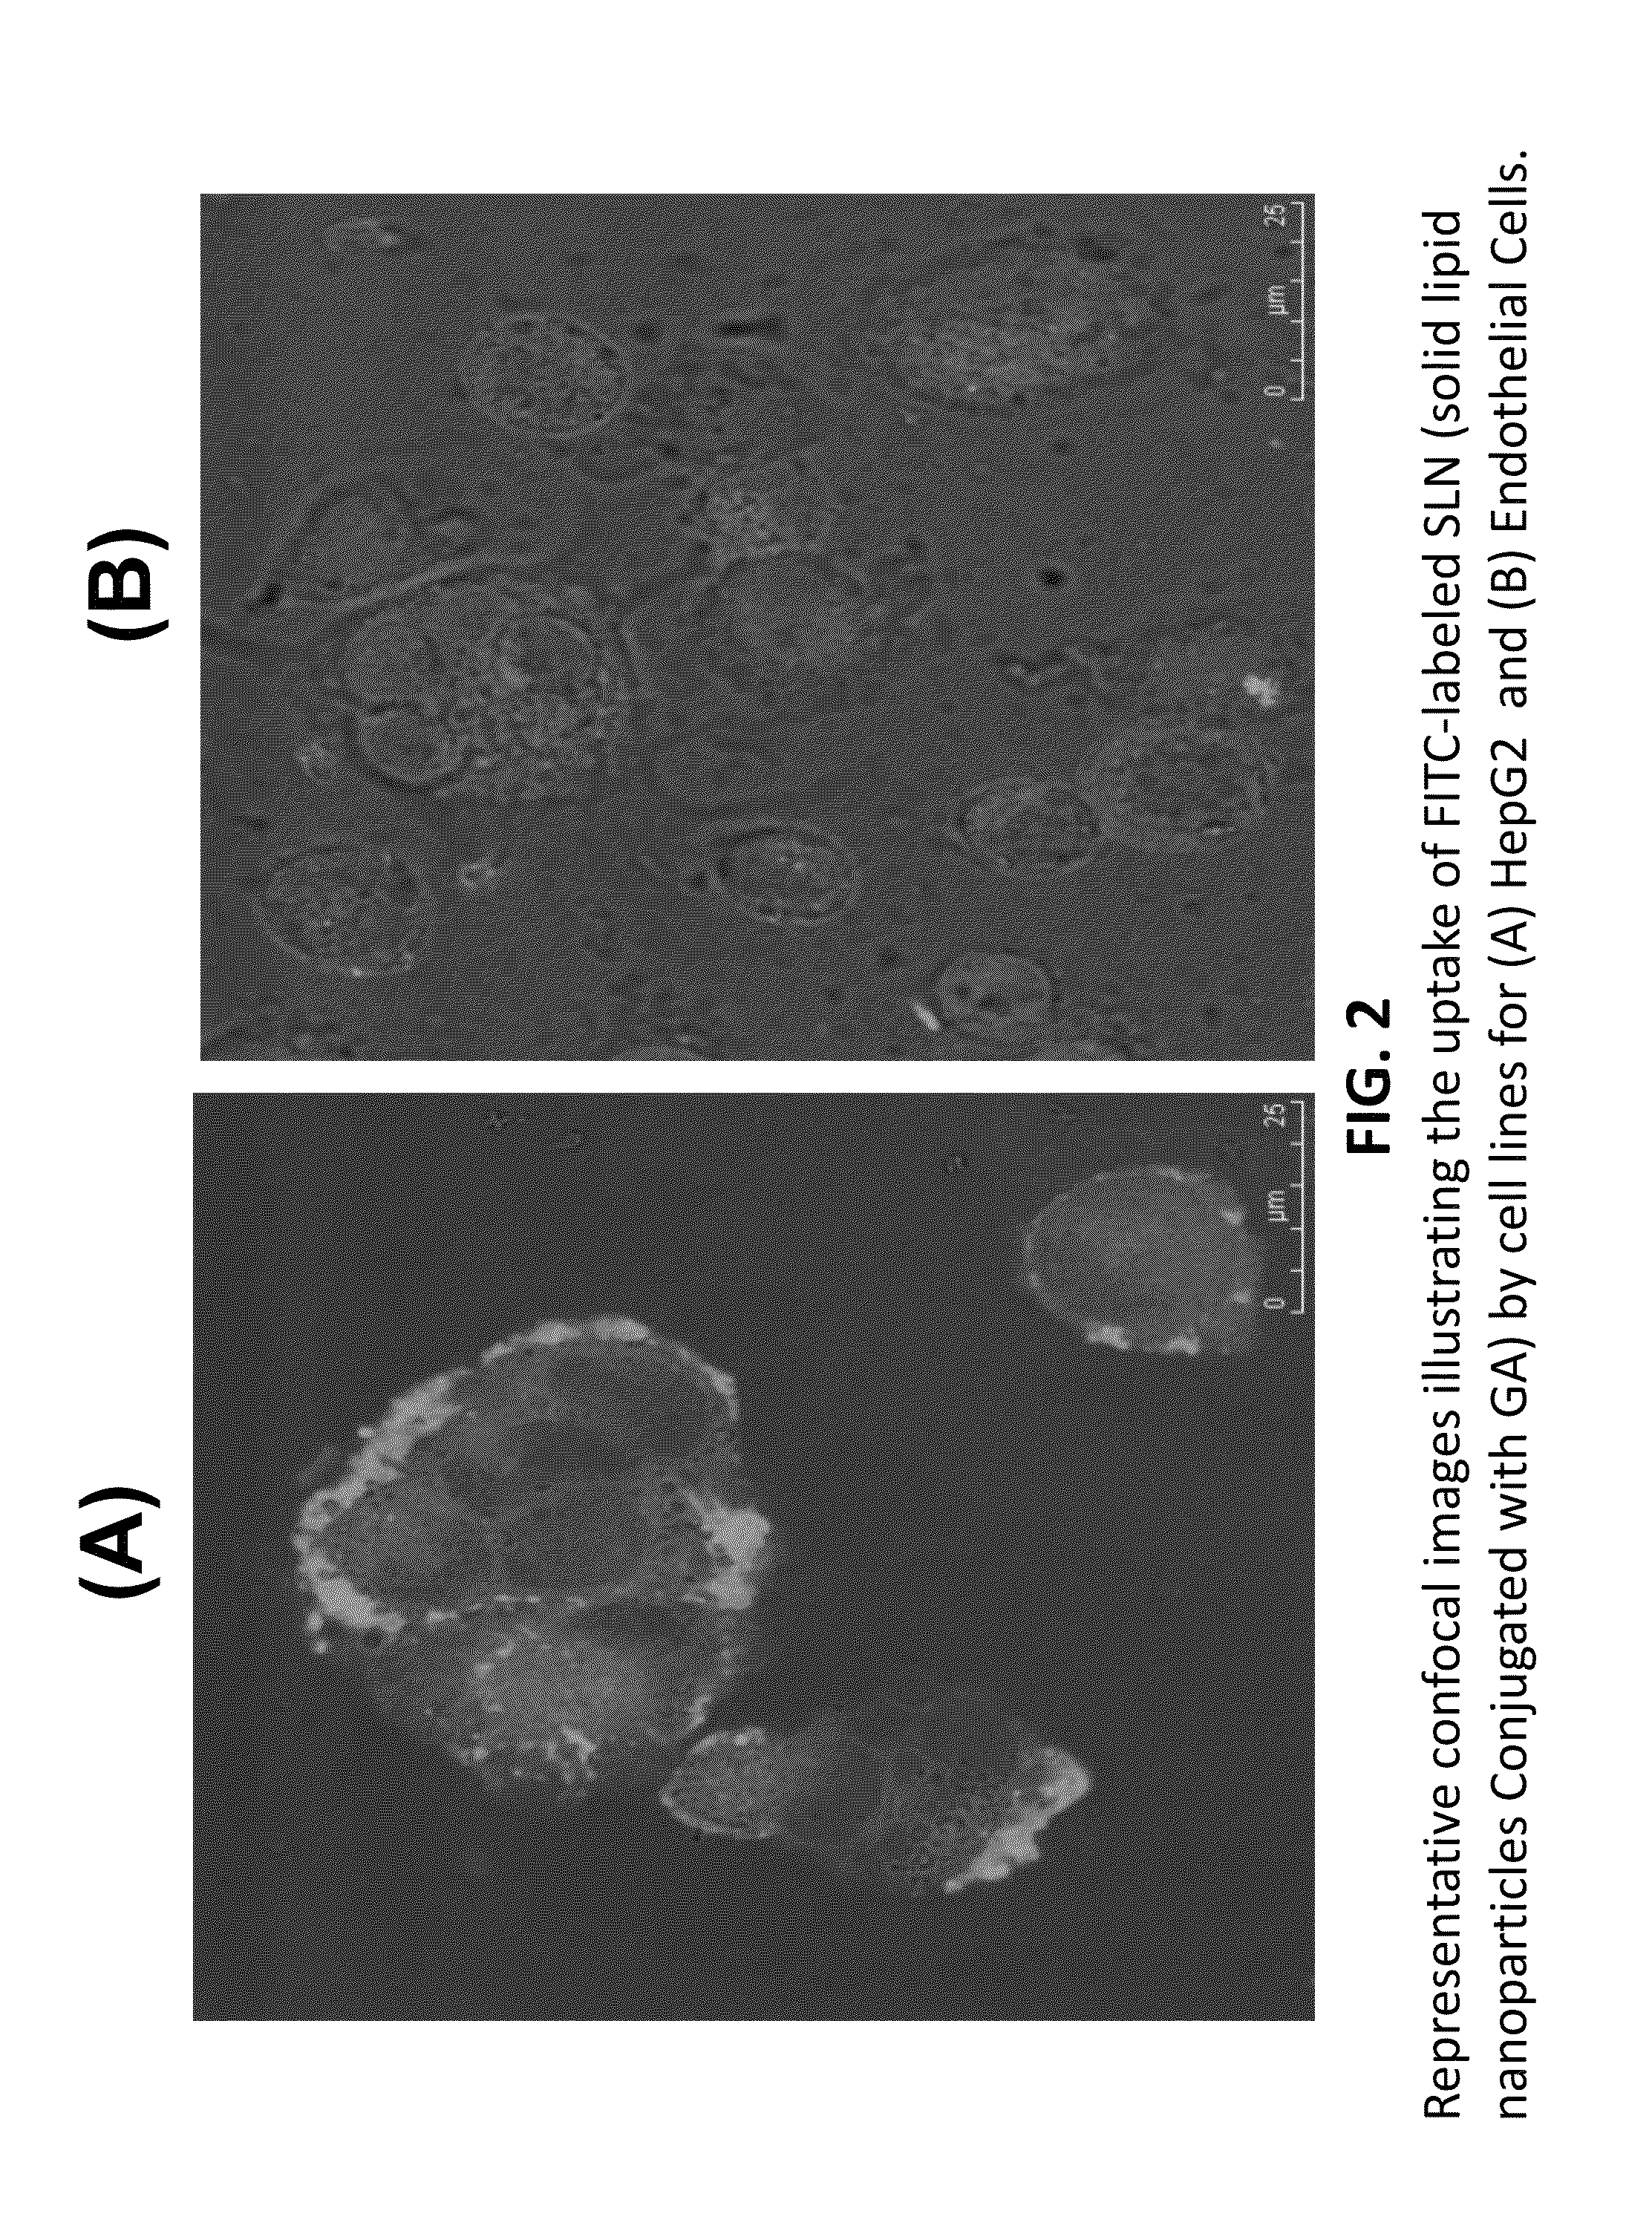 Nanoformulation and methods of use of thyroid receptor beta1 agonists for liver targeting